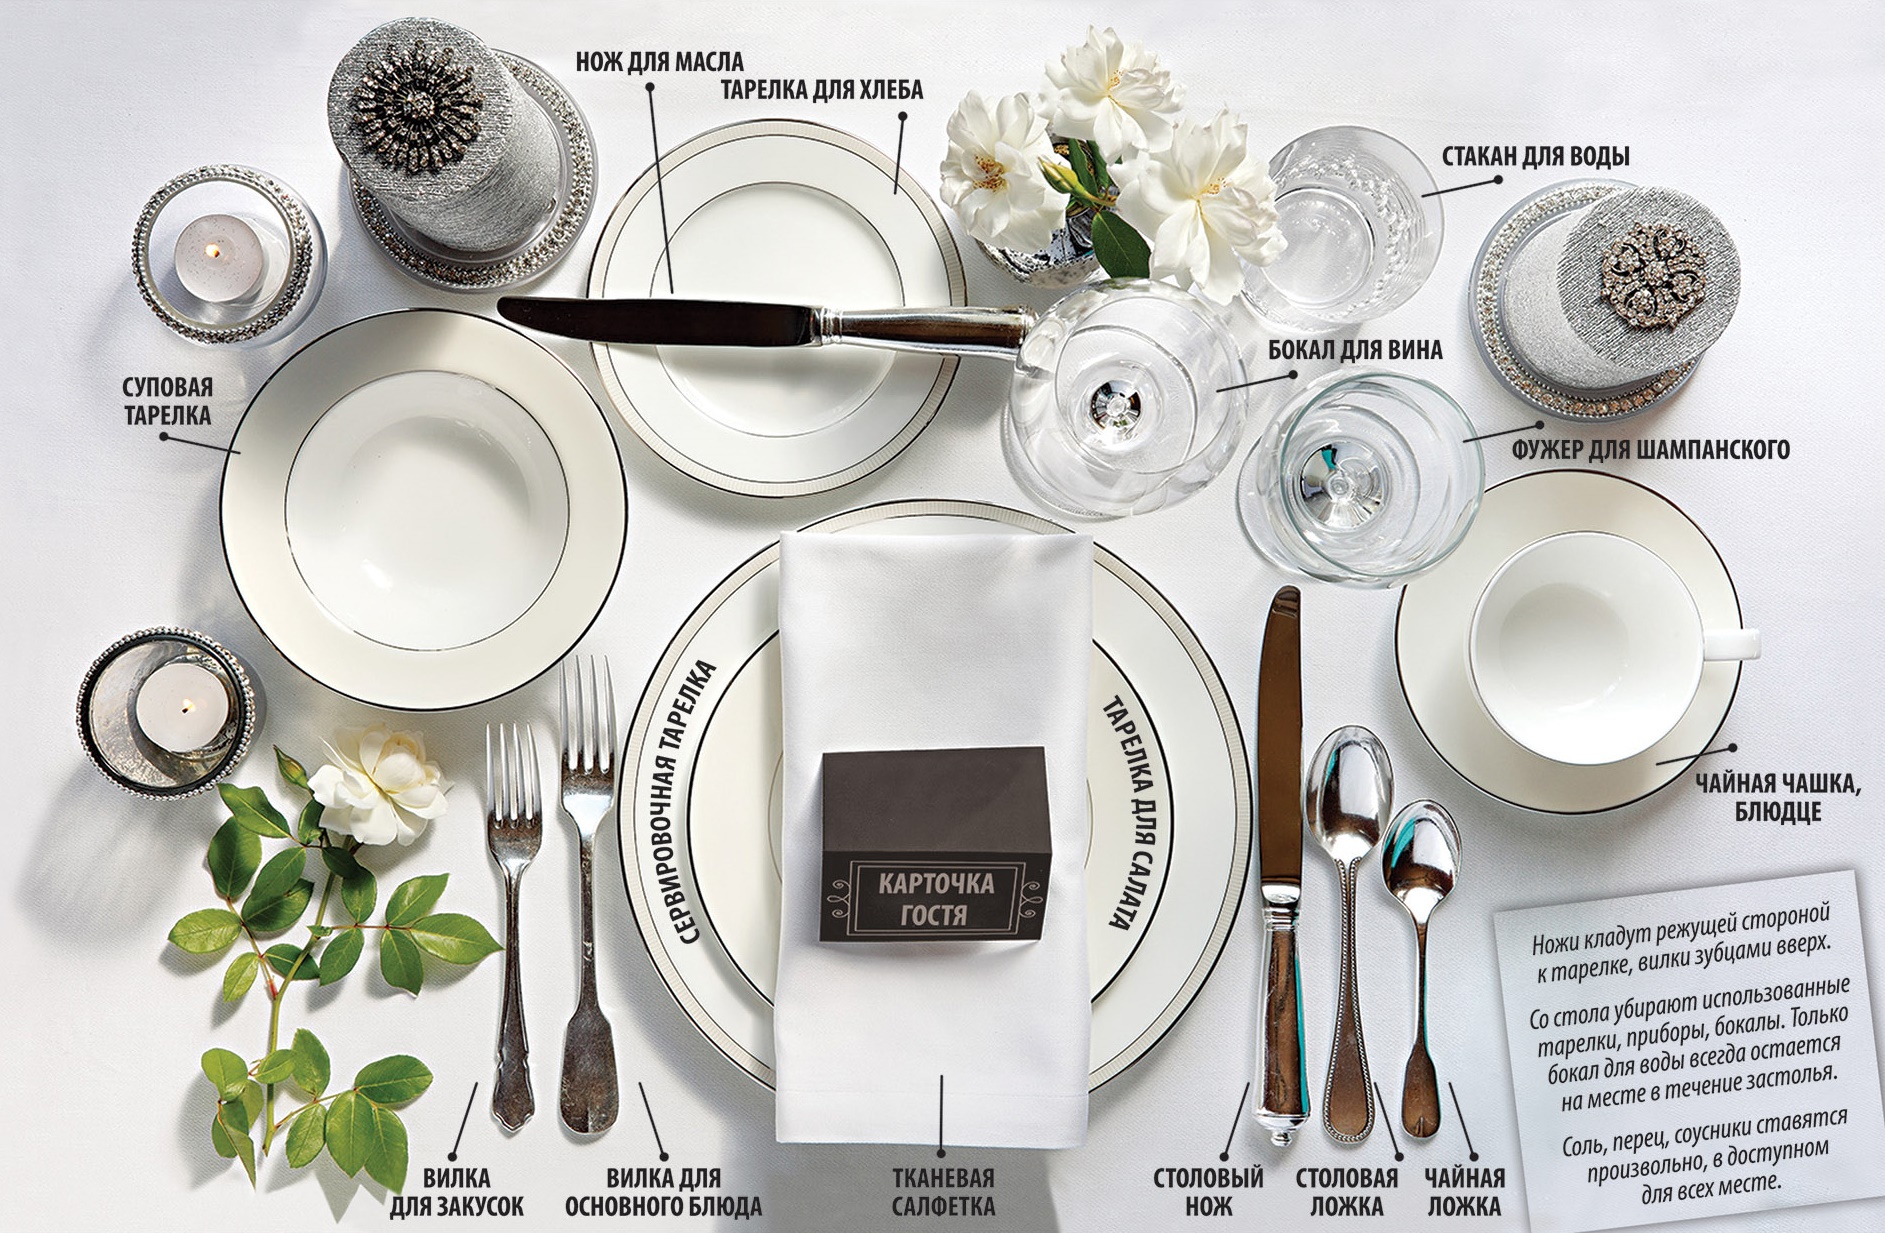 How to create a stylish and functional table for receiving guests with the help of dishes and appliances from Israel?